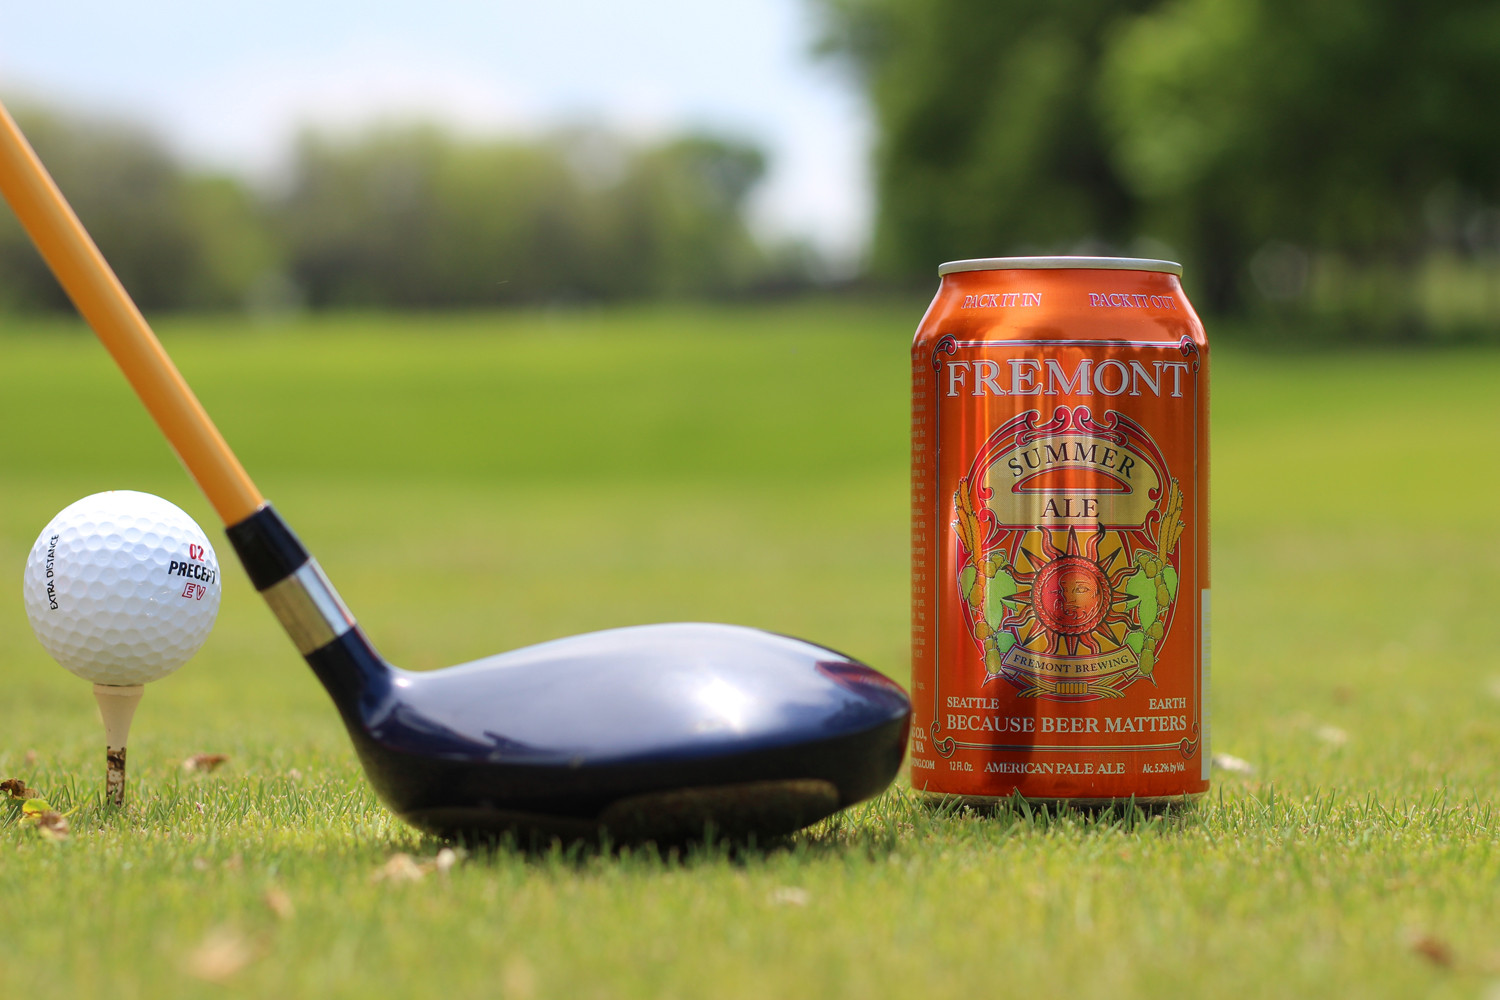 Fremont's Summer Ale summer beer can is great for a day of golf.